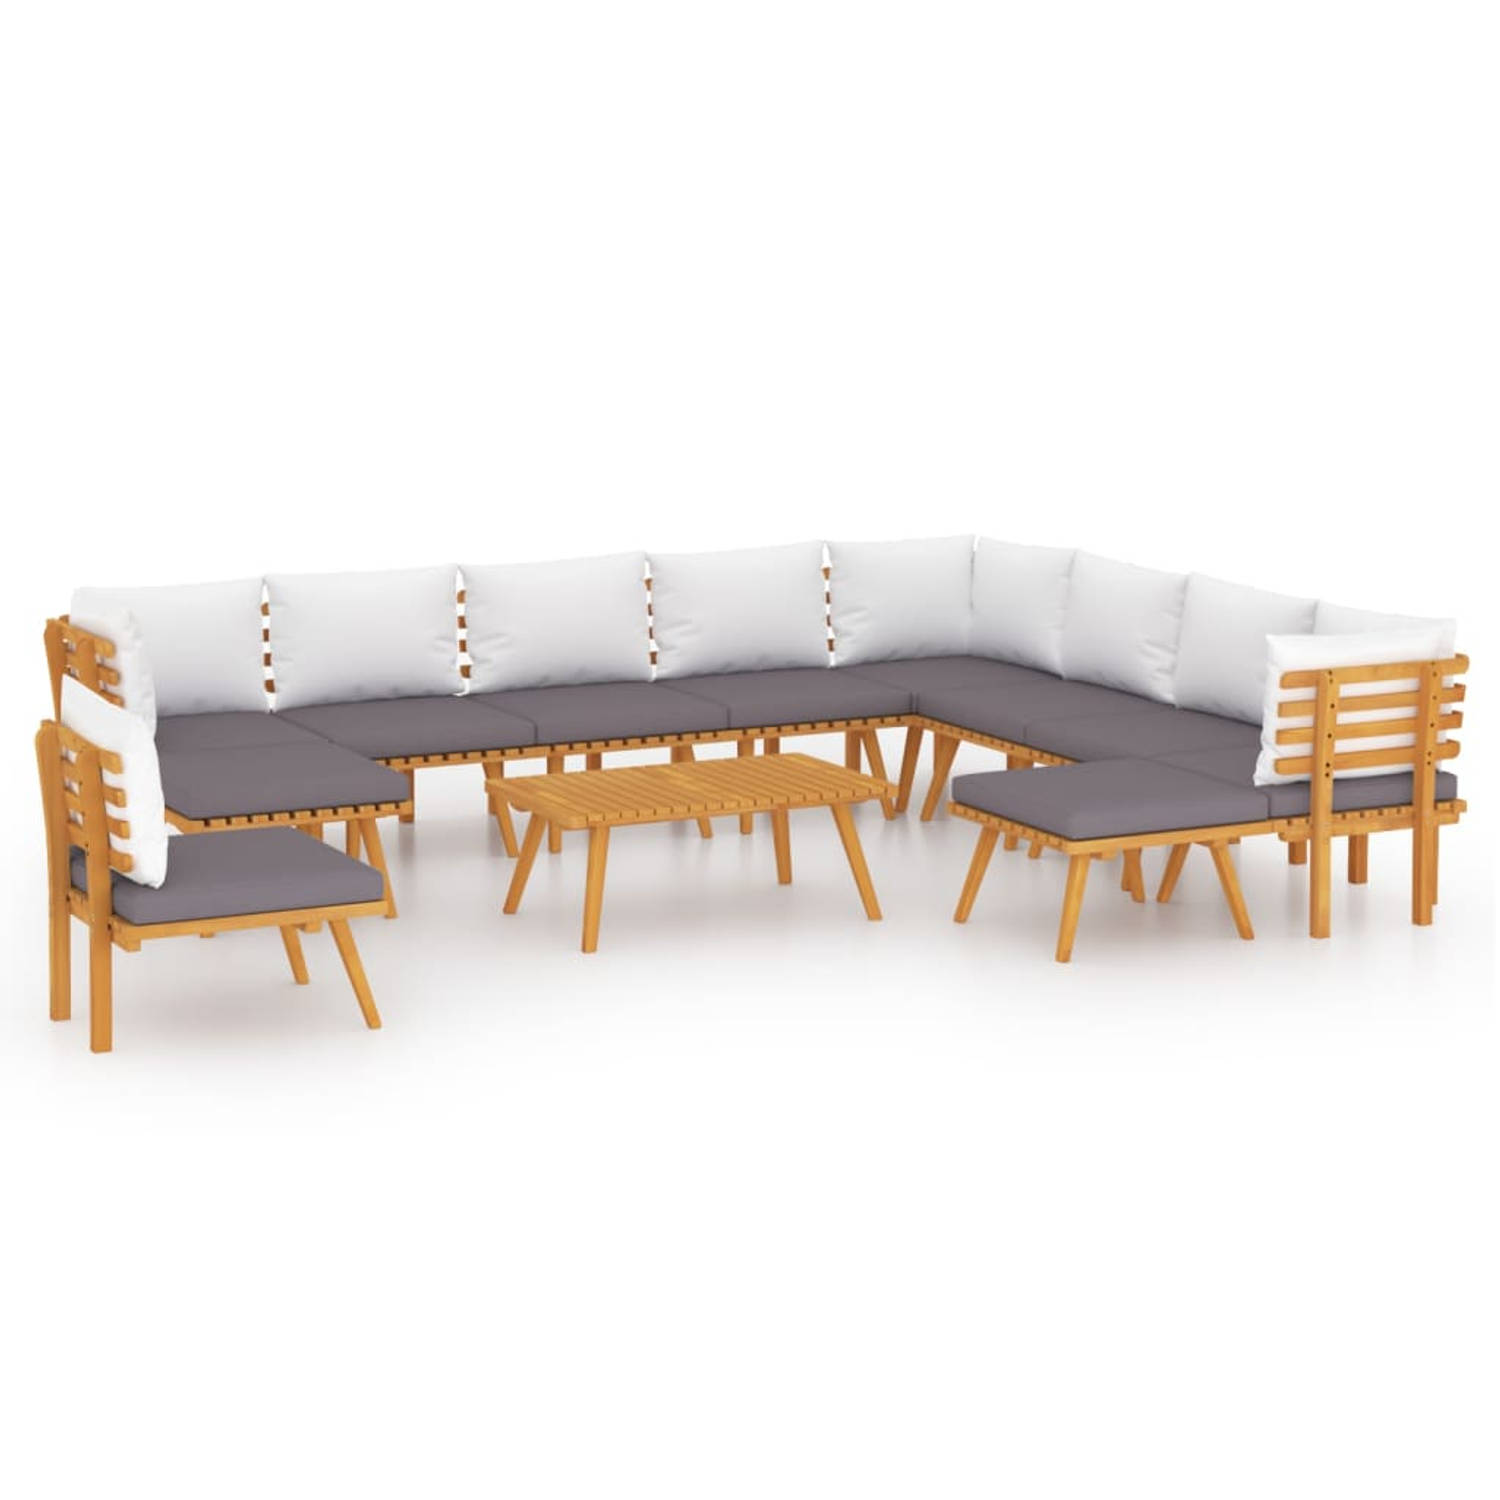 The Living Store 12-delige Loungeset met kussens massief acaciahout - Tuinset